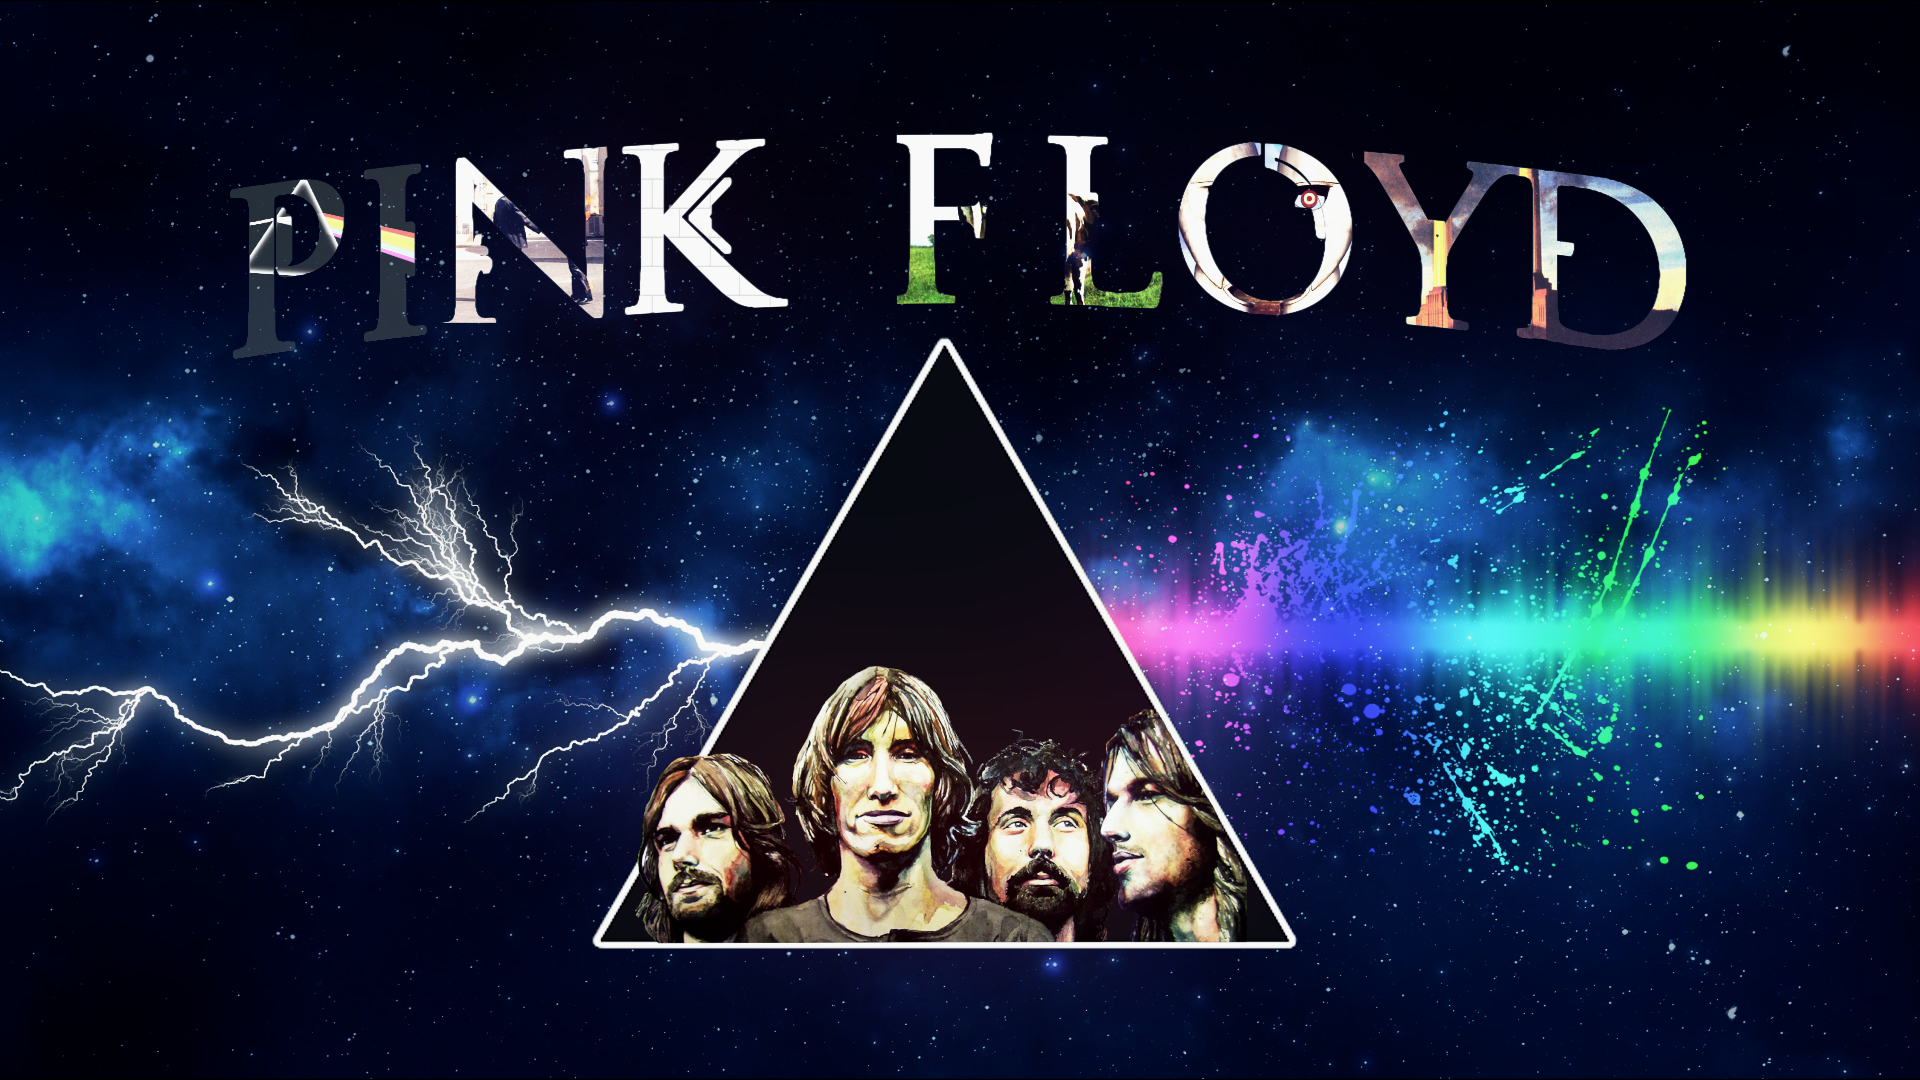 Pink Floyd Wallpaper Image Photos Pictures Background